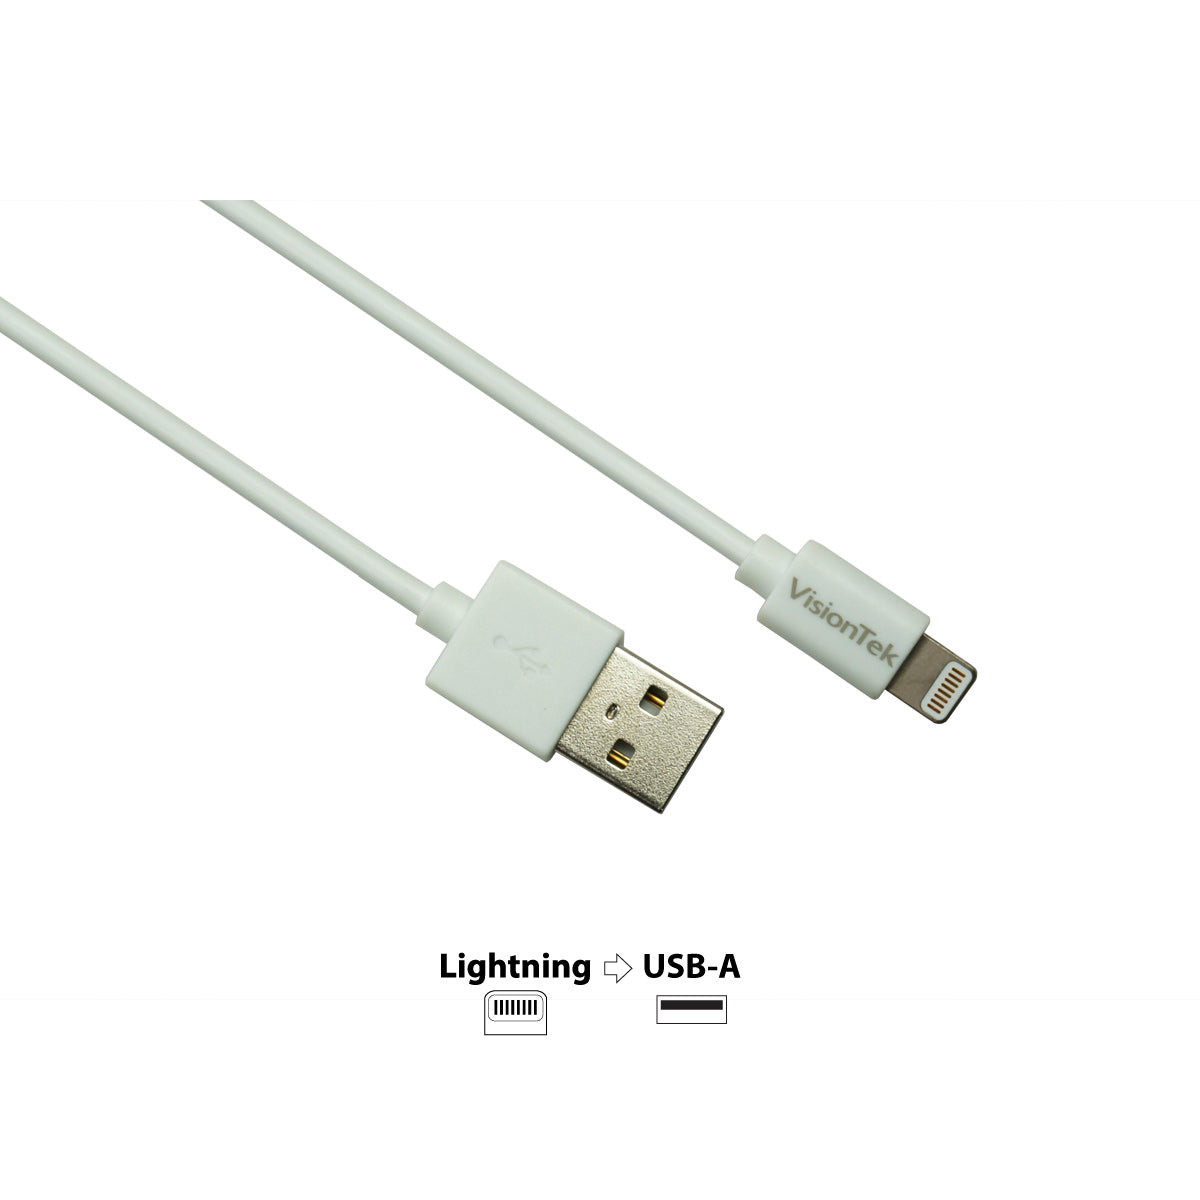 Lightning to USB White 2 Meter MFI Cable